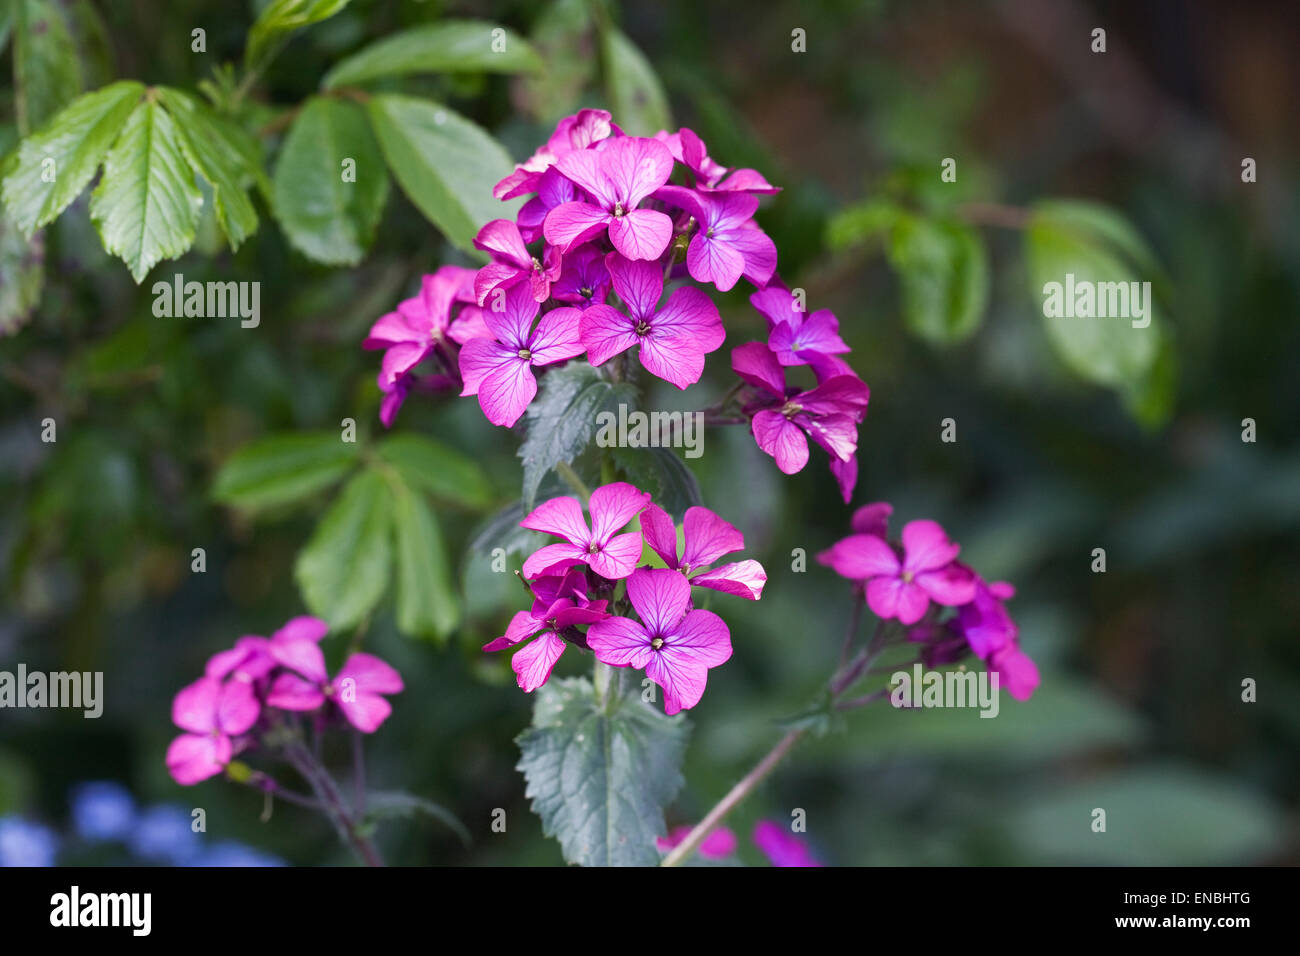 Lunaria annua. Honesty plant flowers in the garden. Stock Photo